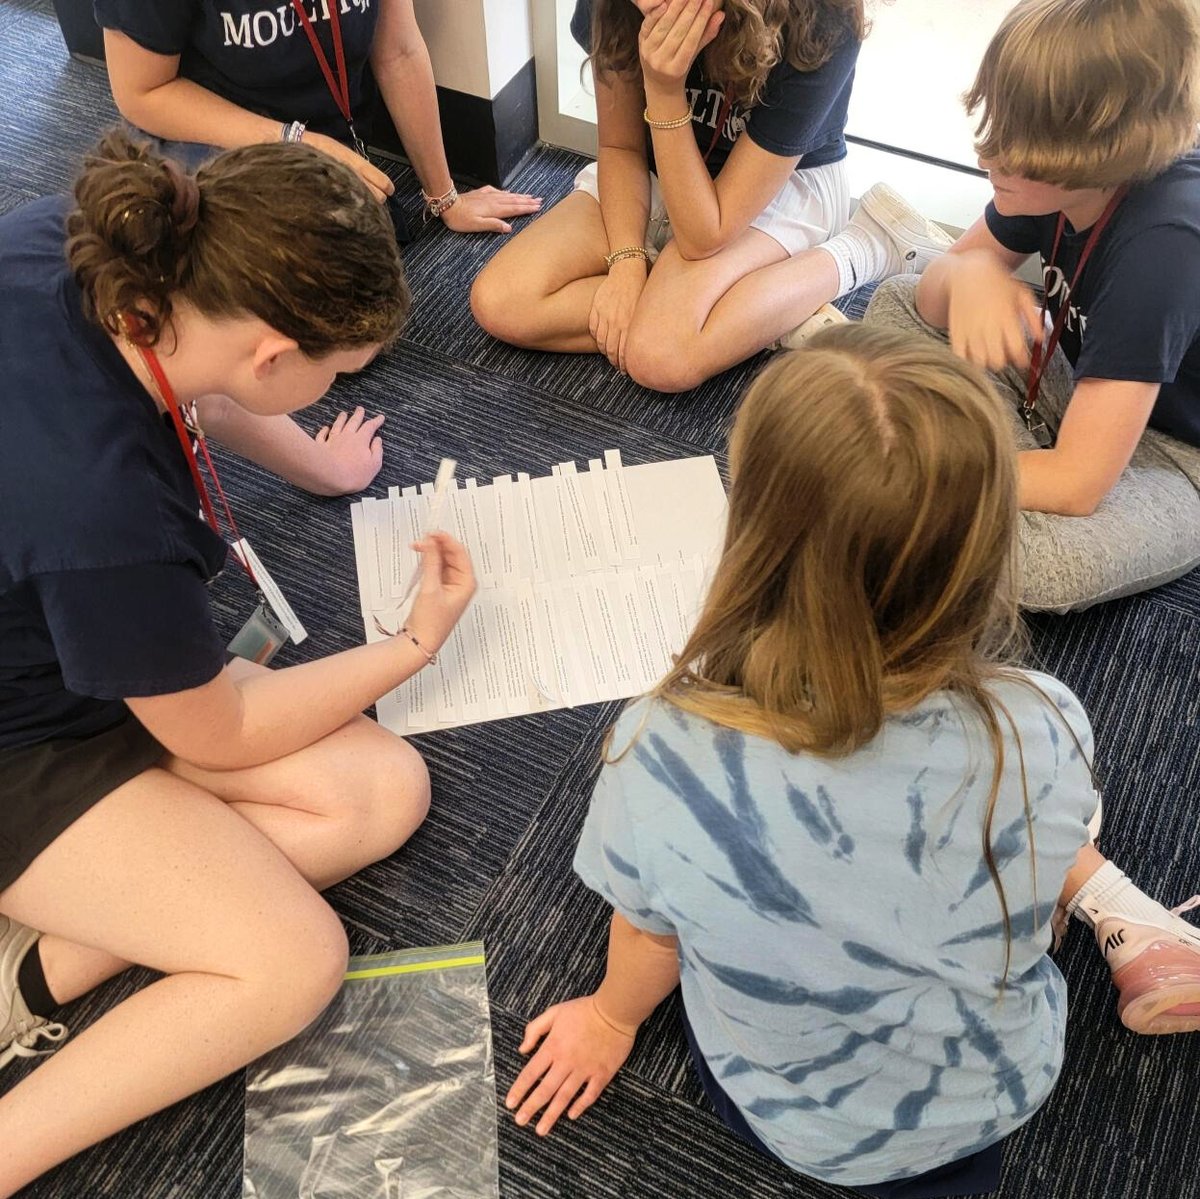 We had a fantastic visit to @MoultrieMiddle on Tuesday!

Students put together timelines chronicling the history of voting rights in the United States.

#CHSVotes #CHSNews #scVOTES #VoteReady